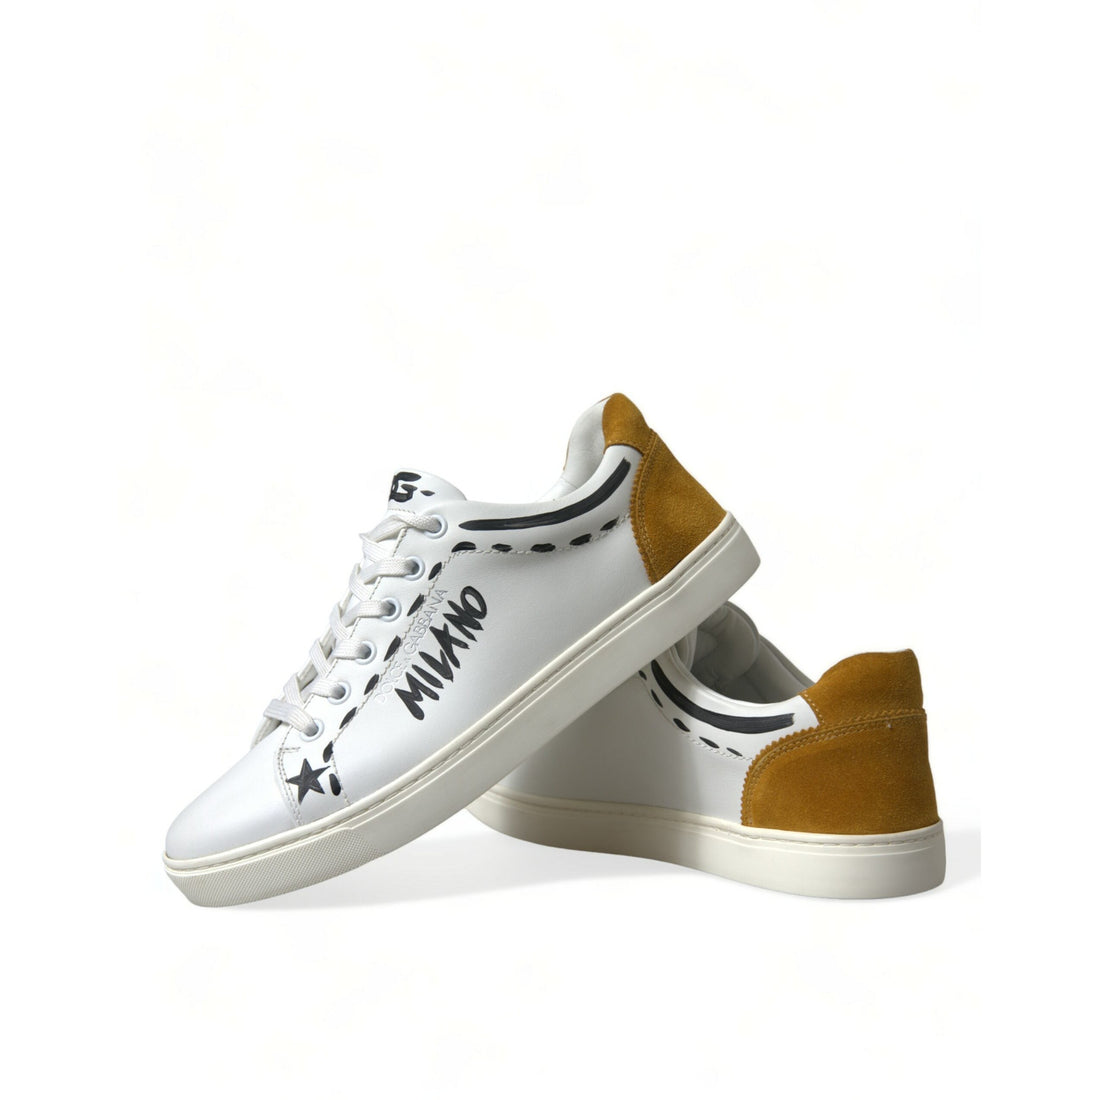 Dolce & Gabbana White Leather LOVE Milano Men Sneakers Shoes